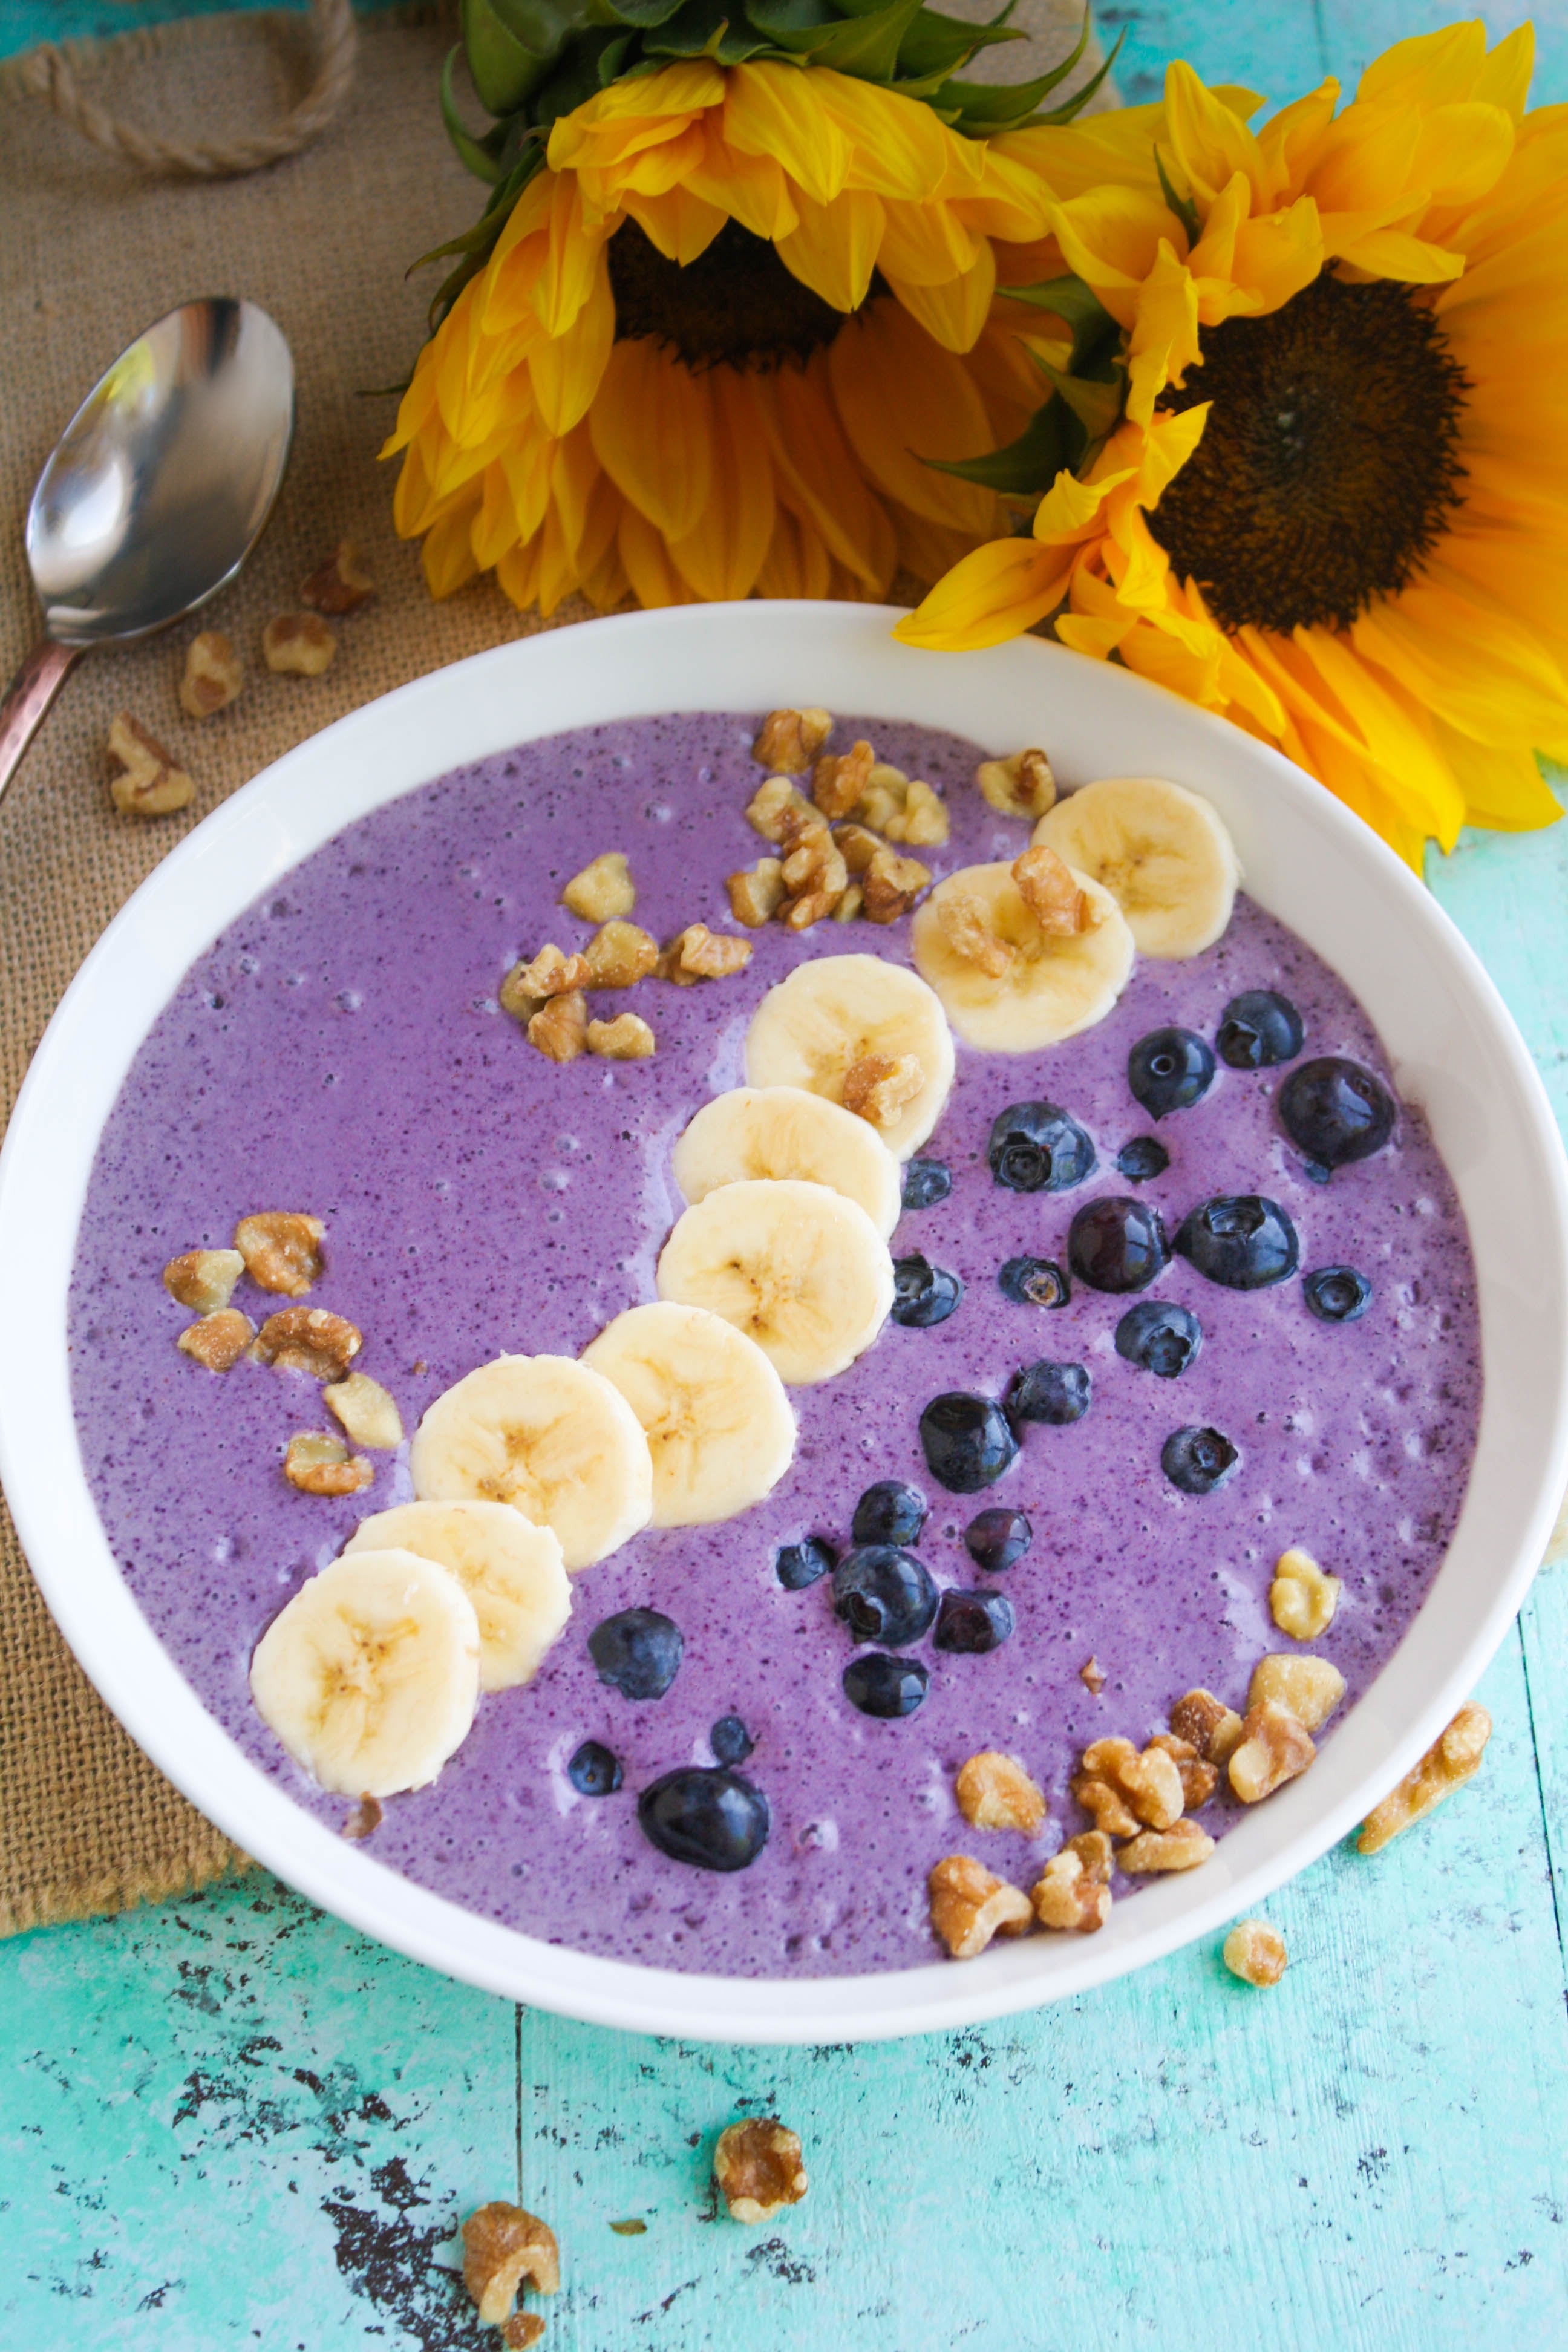 Blueberry Banana Walnut Smoothie Bowls are a great way to start your day. These Blueberry Banana Walnut Smoothie Bowls are a delight first thing in the a.m.!